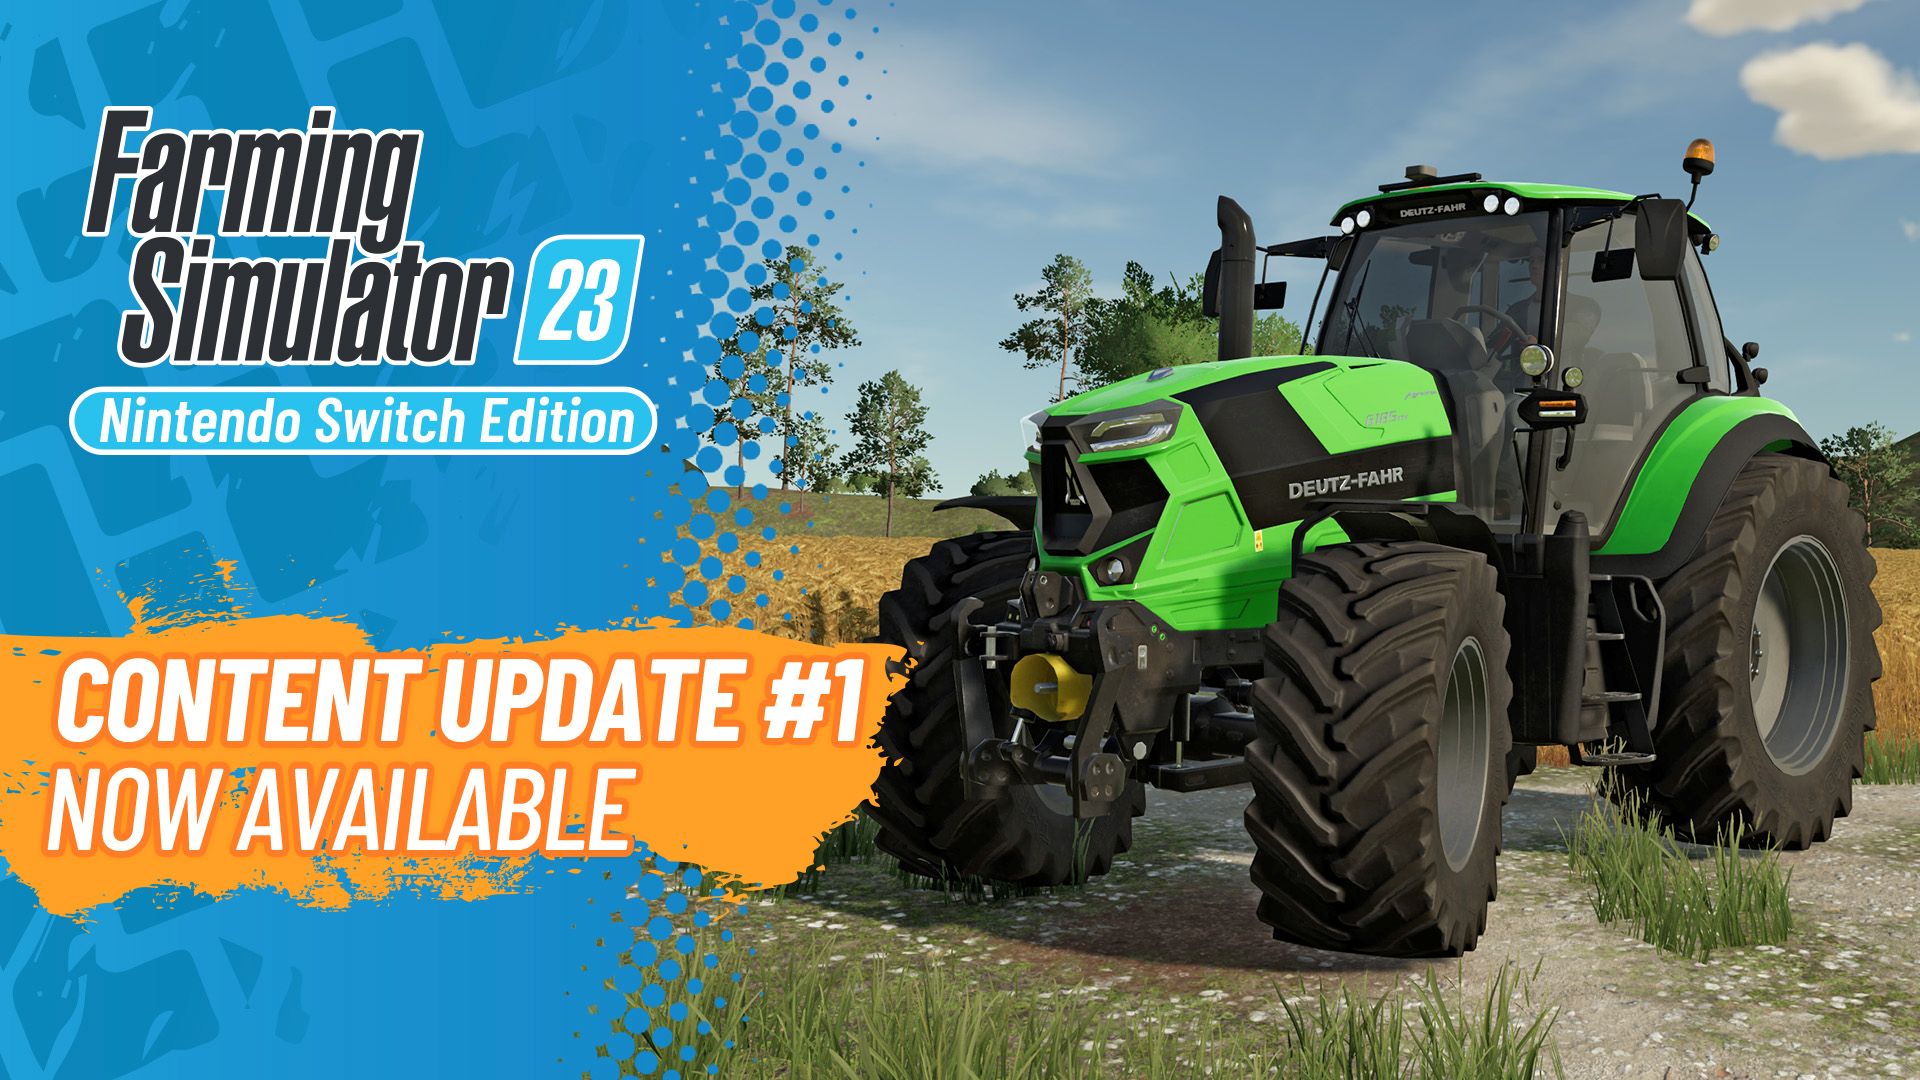 GIANTS SOFTWARE RELEASES FREE CONTENT UPDATE FOR FARMING SIMULATOR 23 ON NINTENTO SWITCH